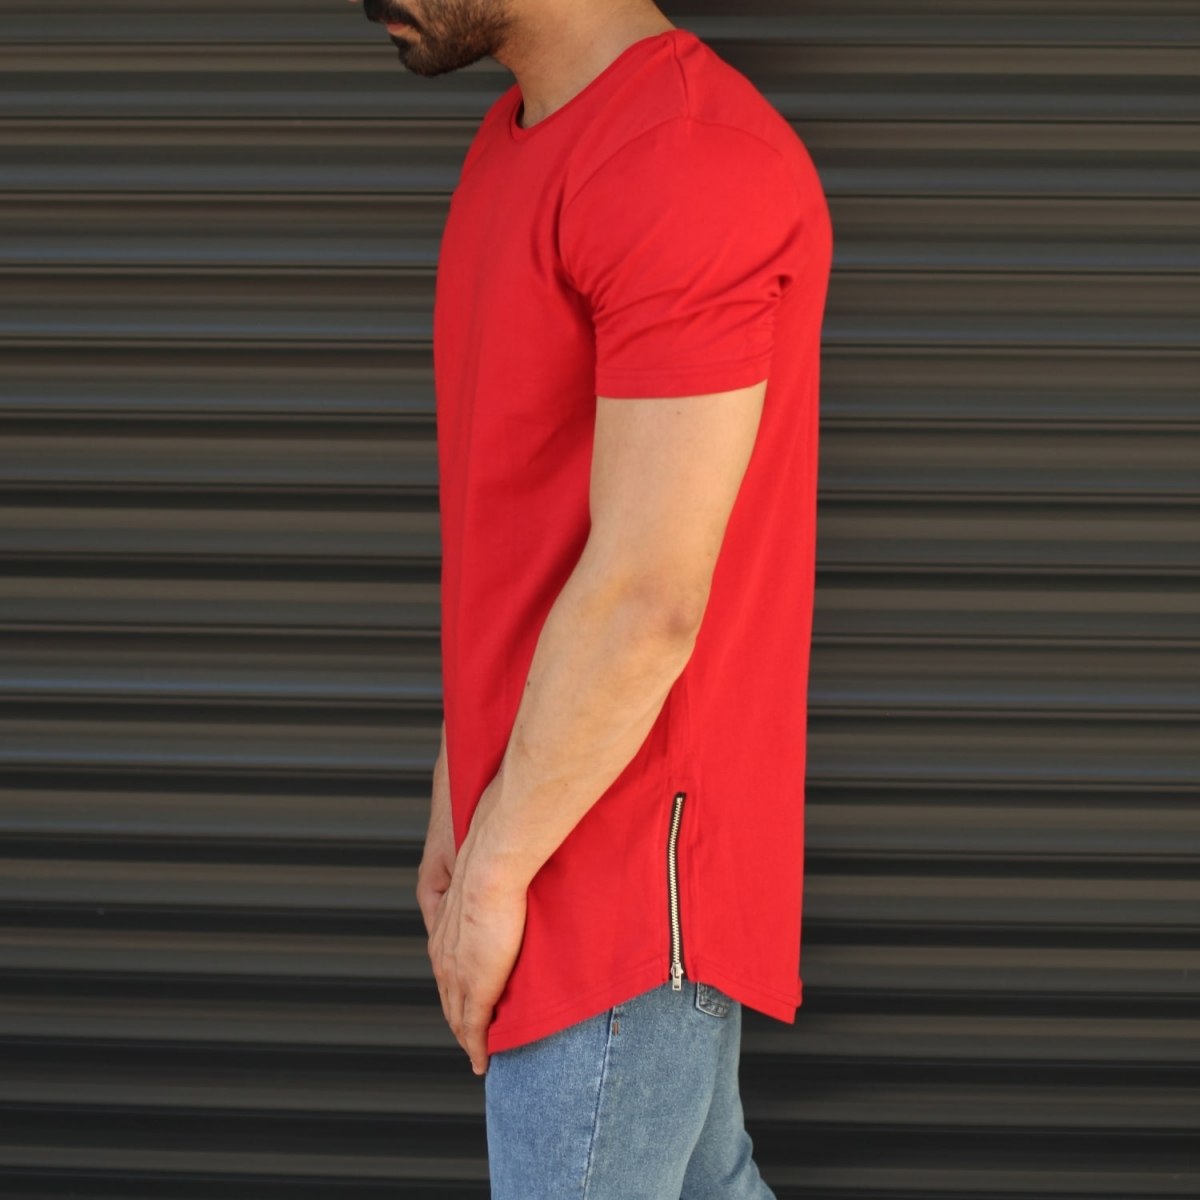 Men's Longline Round Neck T-Shirt With Zipper In Red - 4